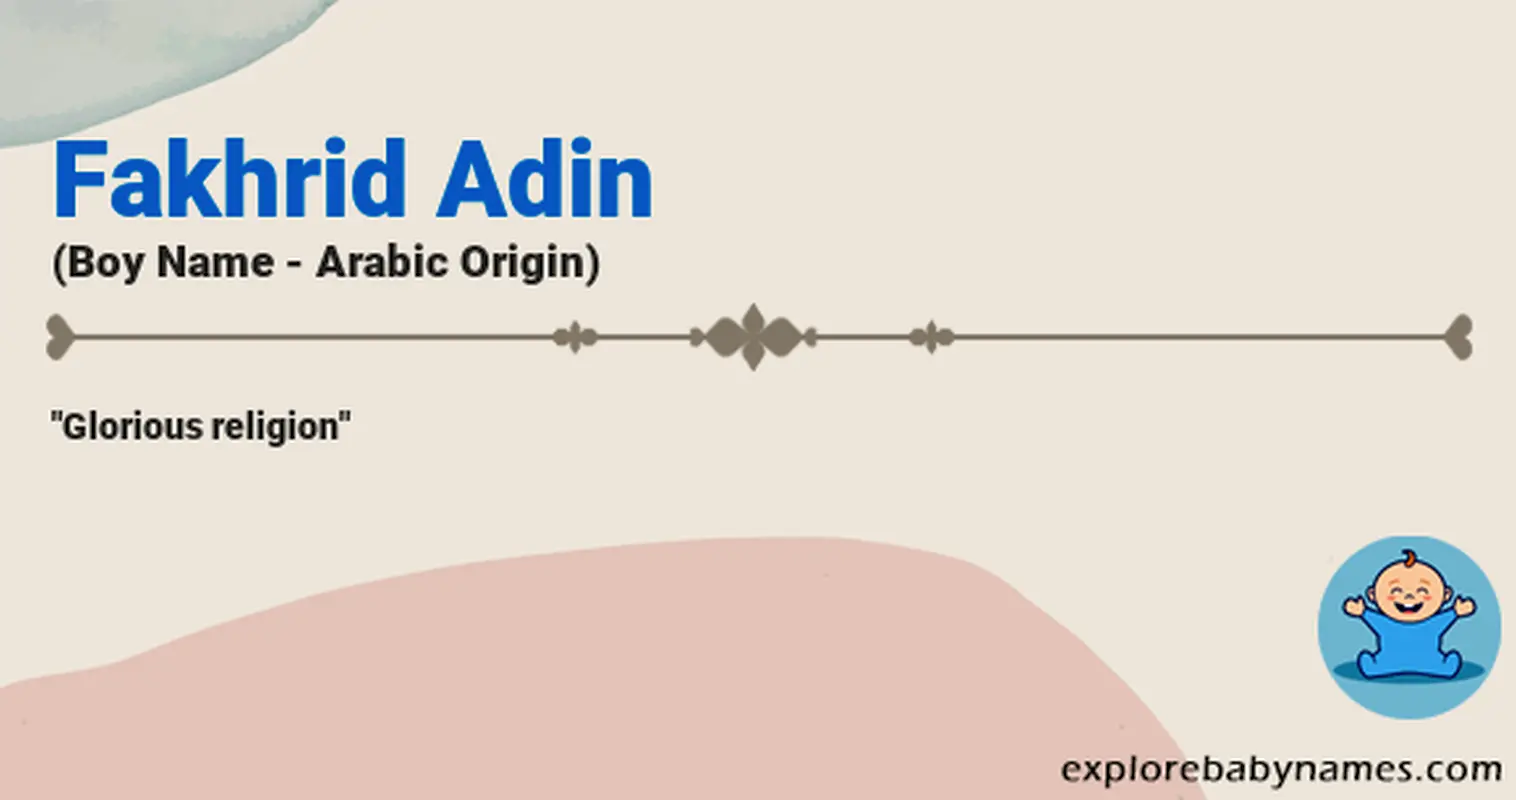 Meaning of Fakhrid Adin